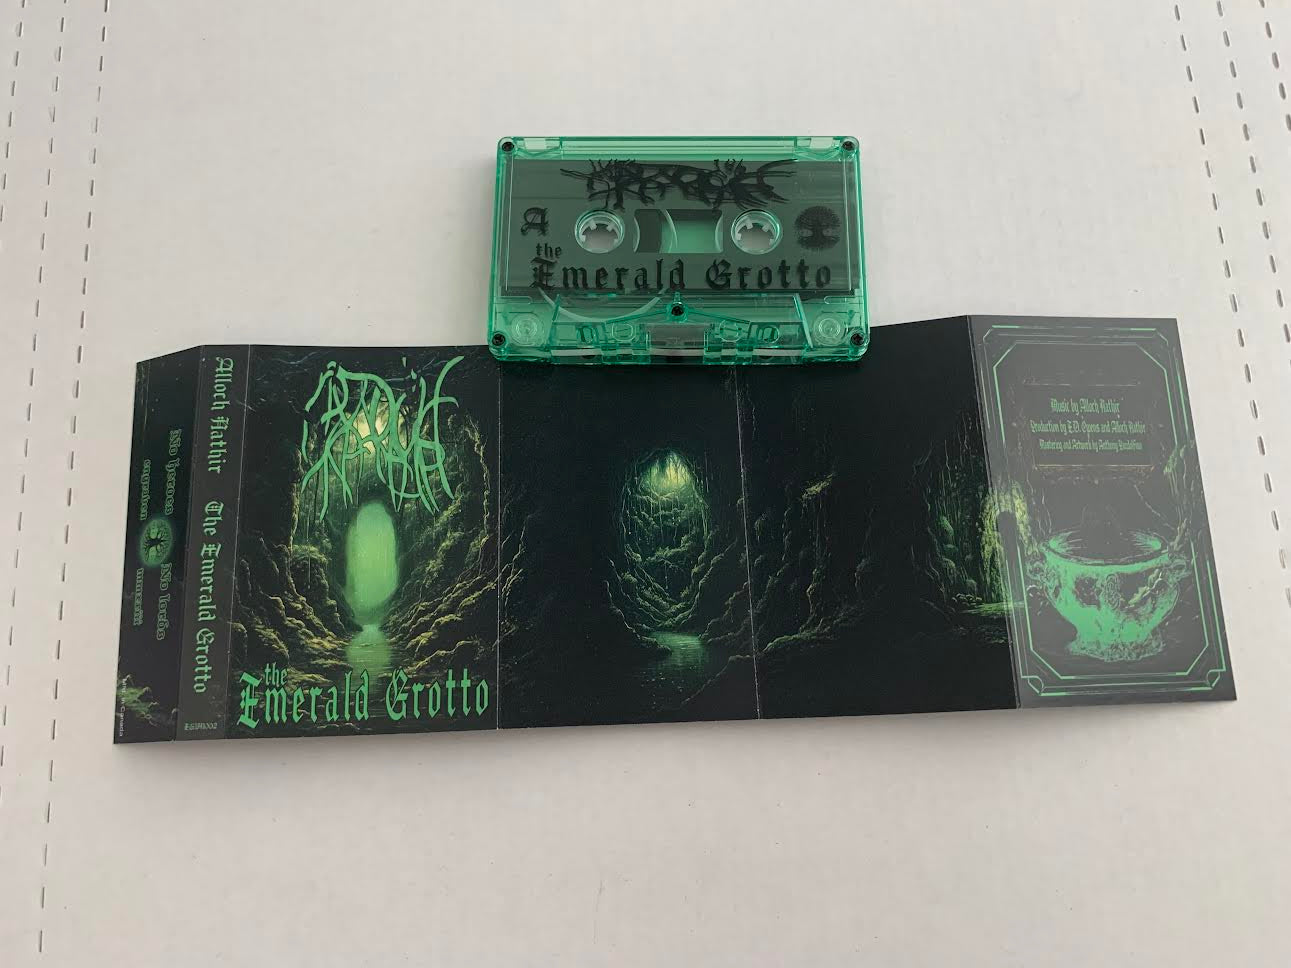 Alloch Nathir - Emerald Grotto, The [Forest Synth] (Engraven - Tape - 10/9/23)